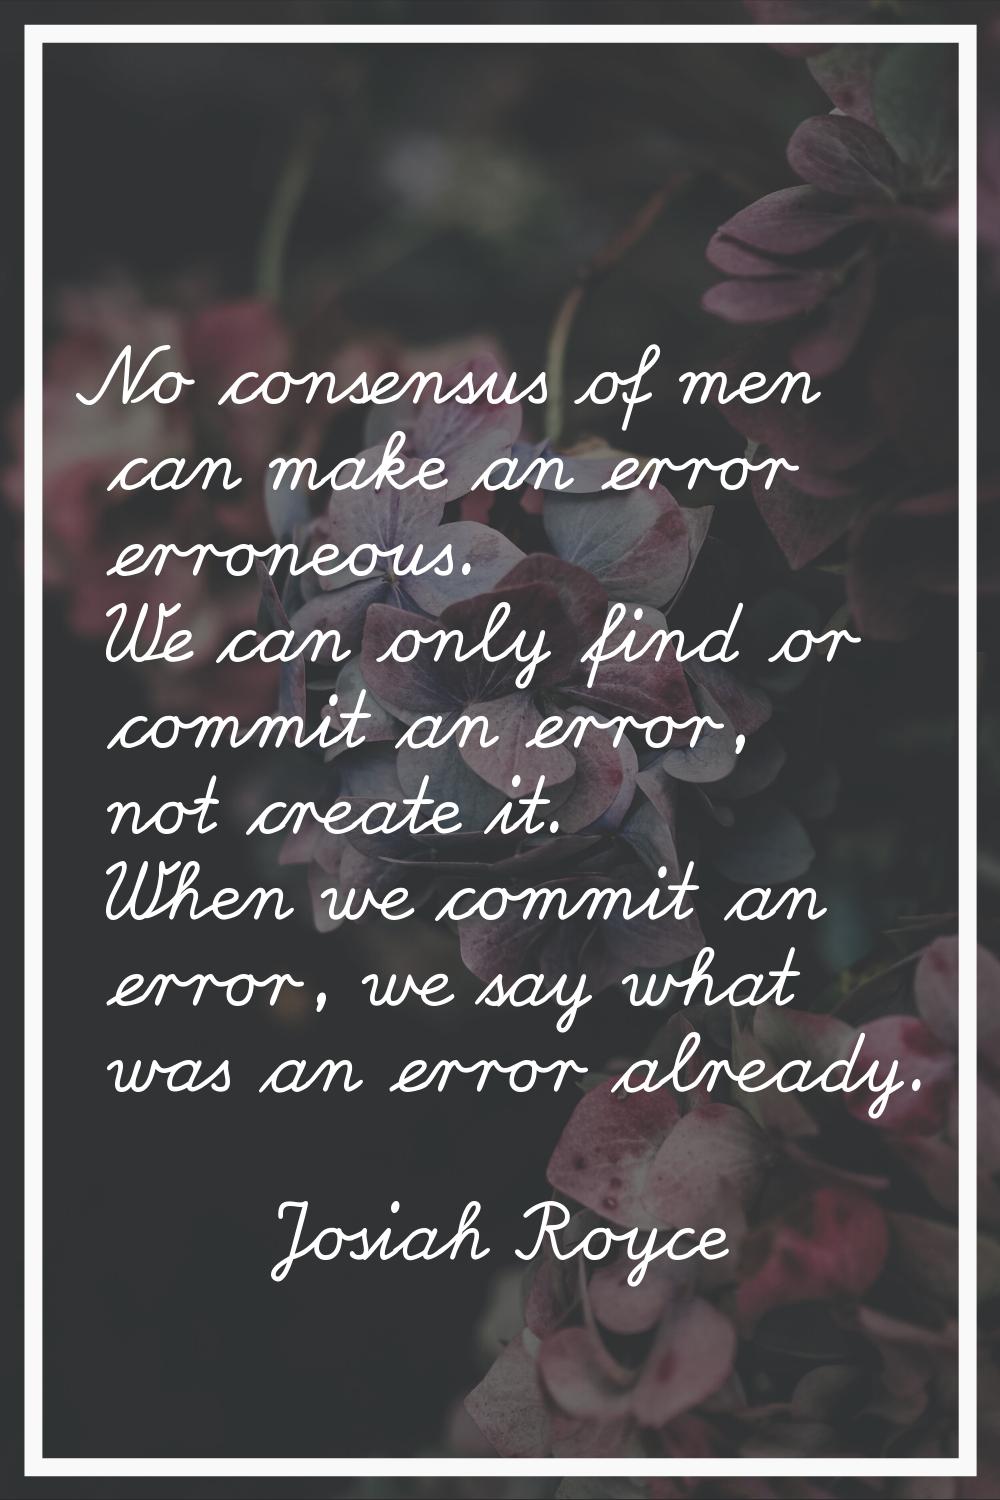 No consensus of men can make an error erroneous. We can only find or commit an error, not create it